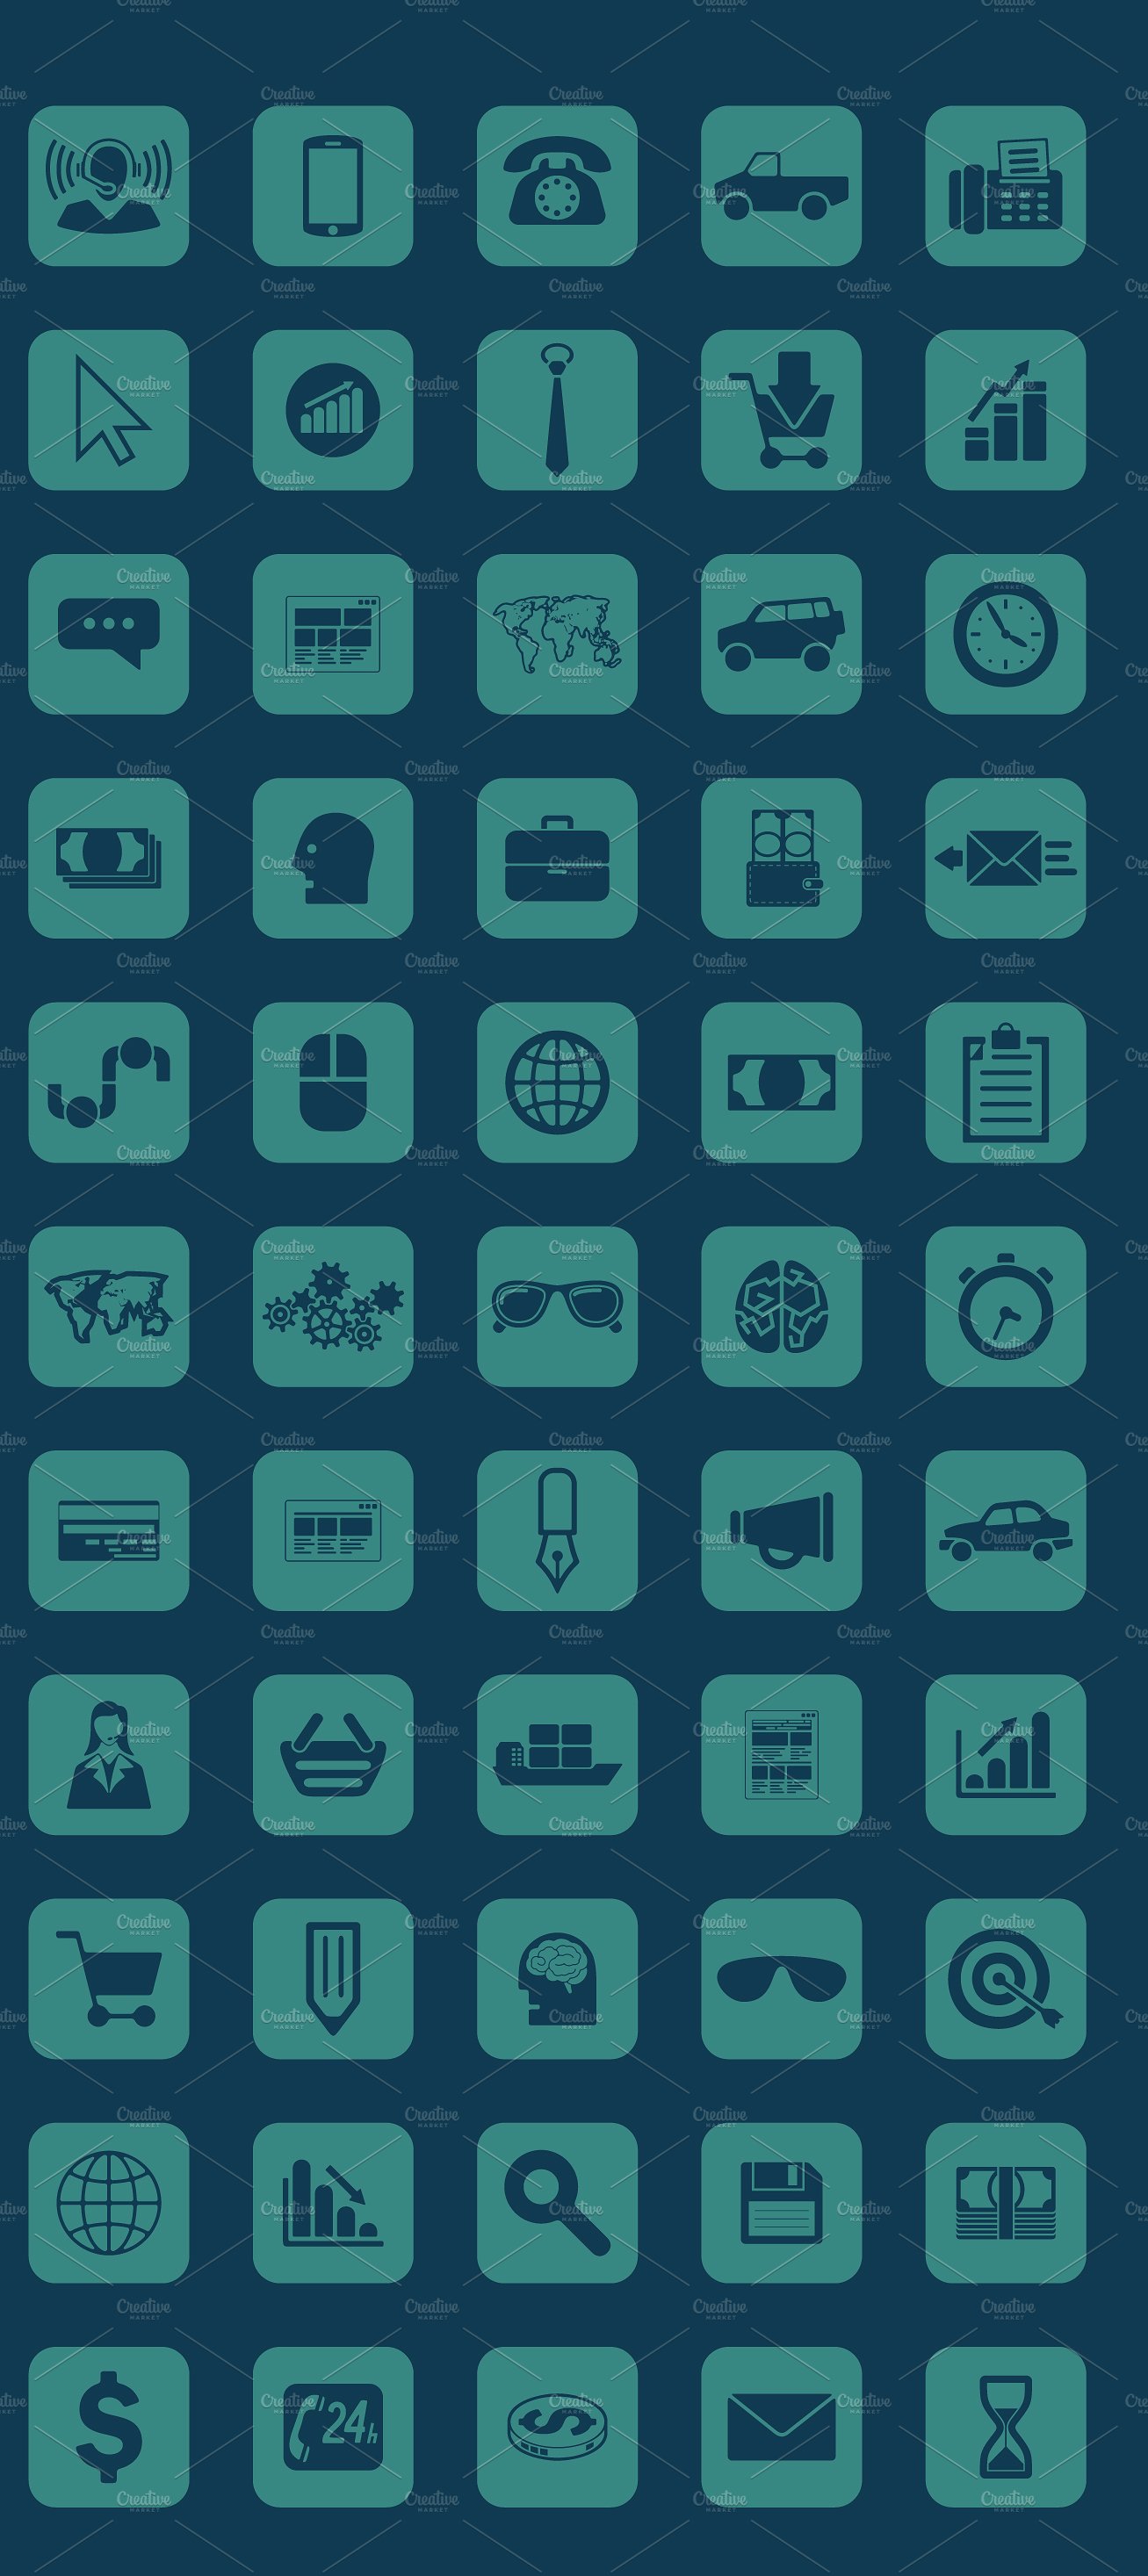 121 BUSINESS simple icons